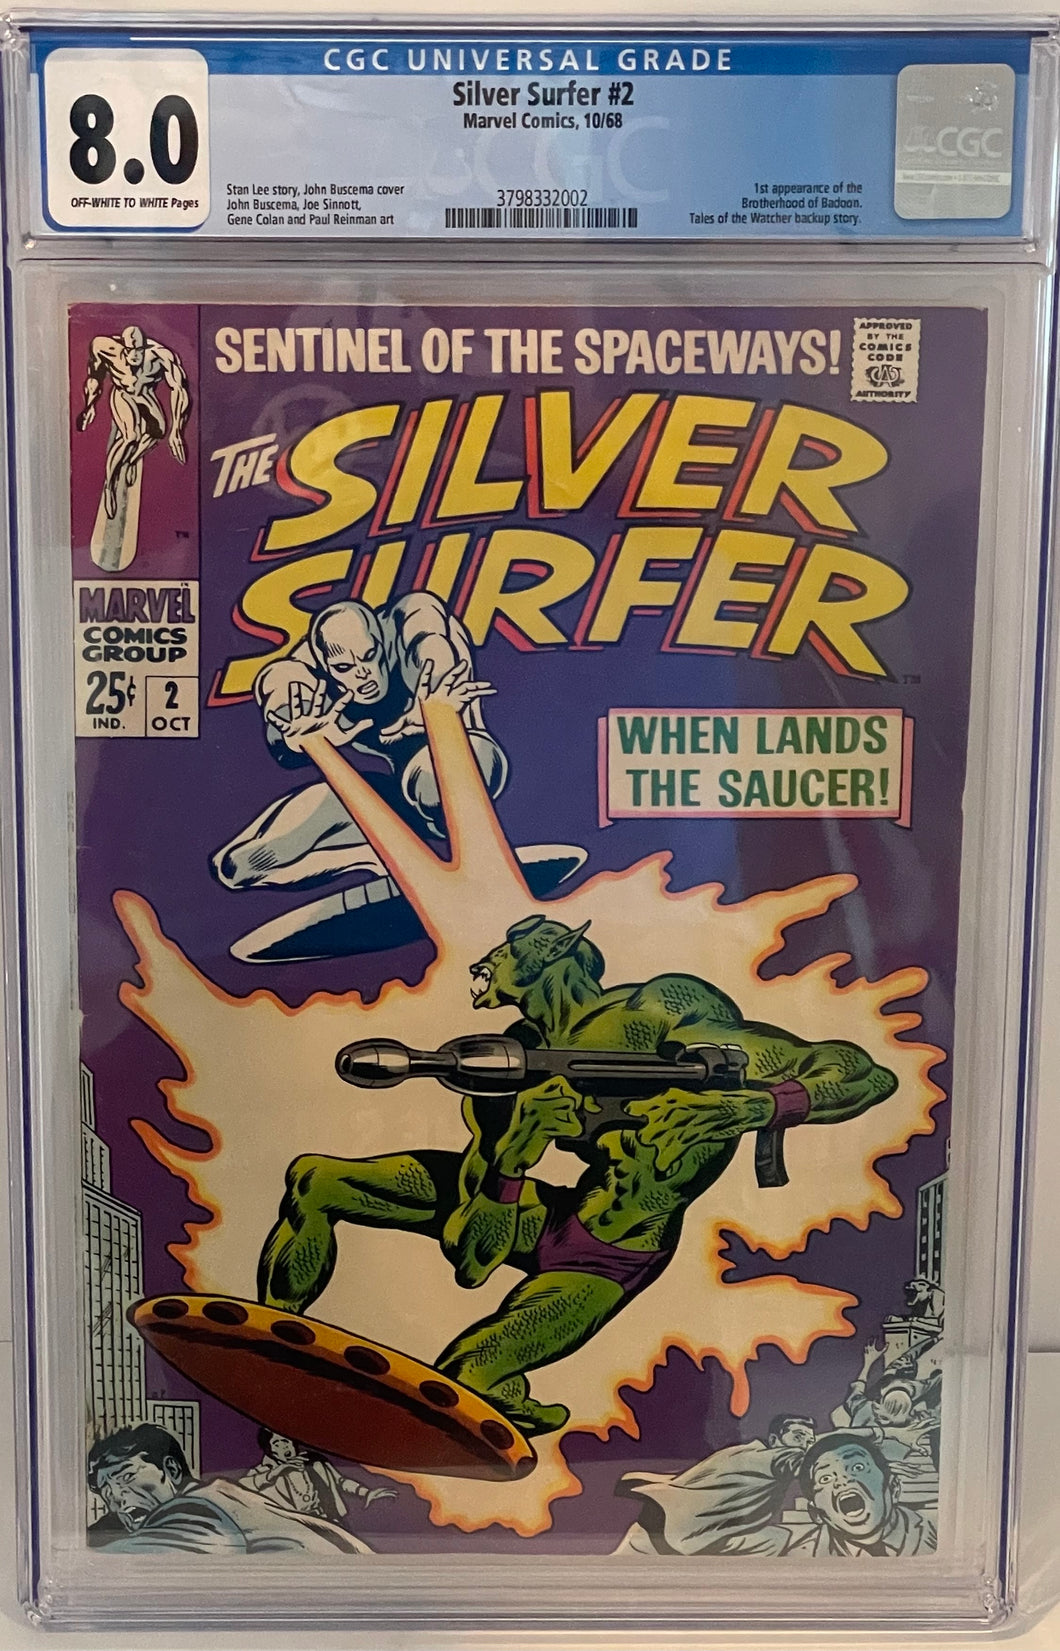 The Silver Surfer #2 8.0 CGC